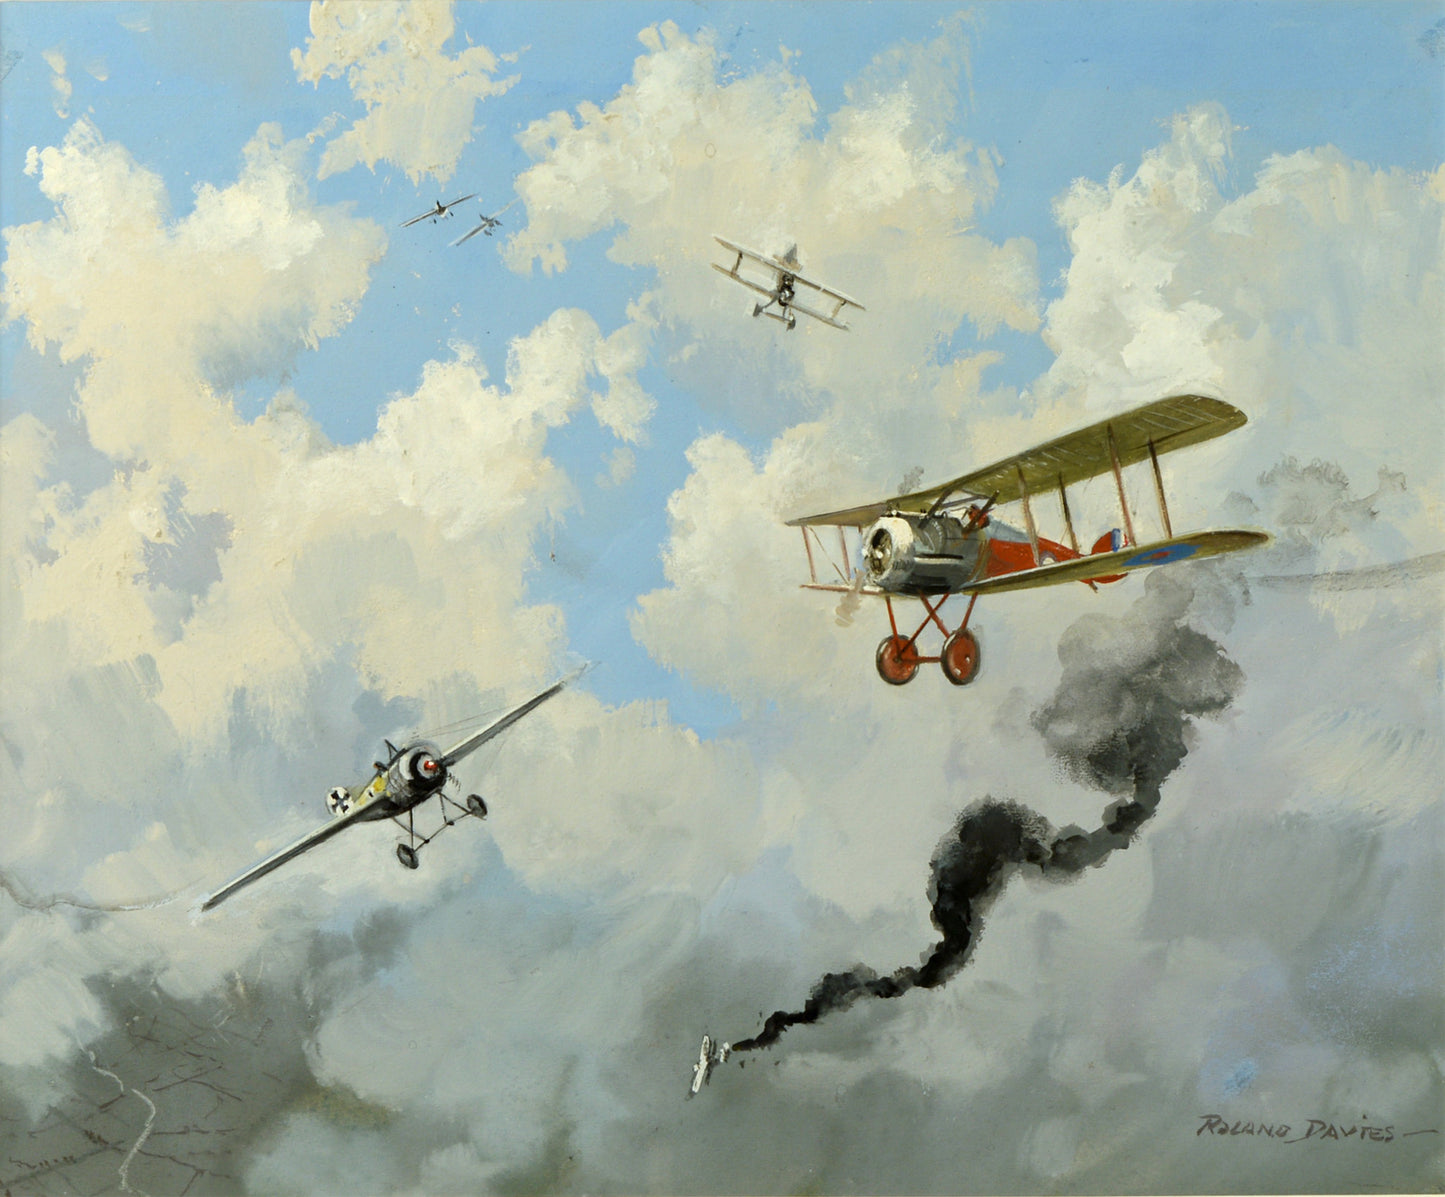 Sopwith Snipe in a dogfight by Roland Davies